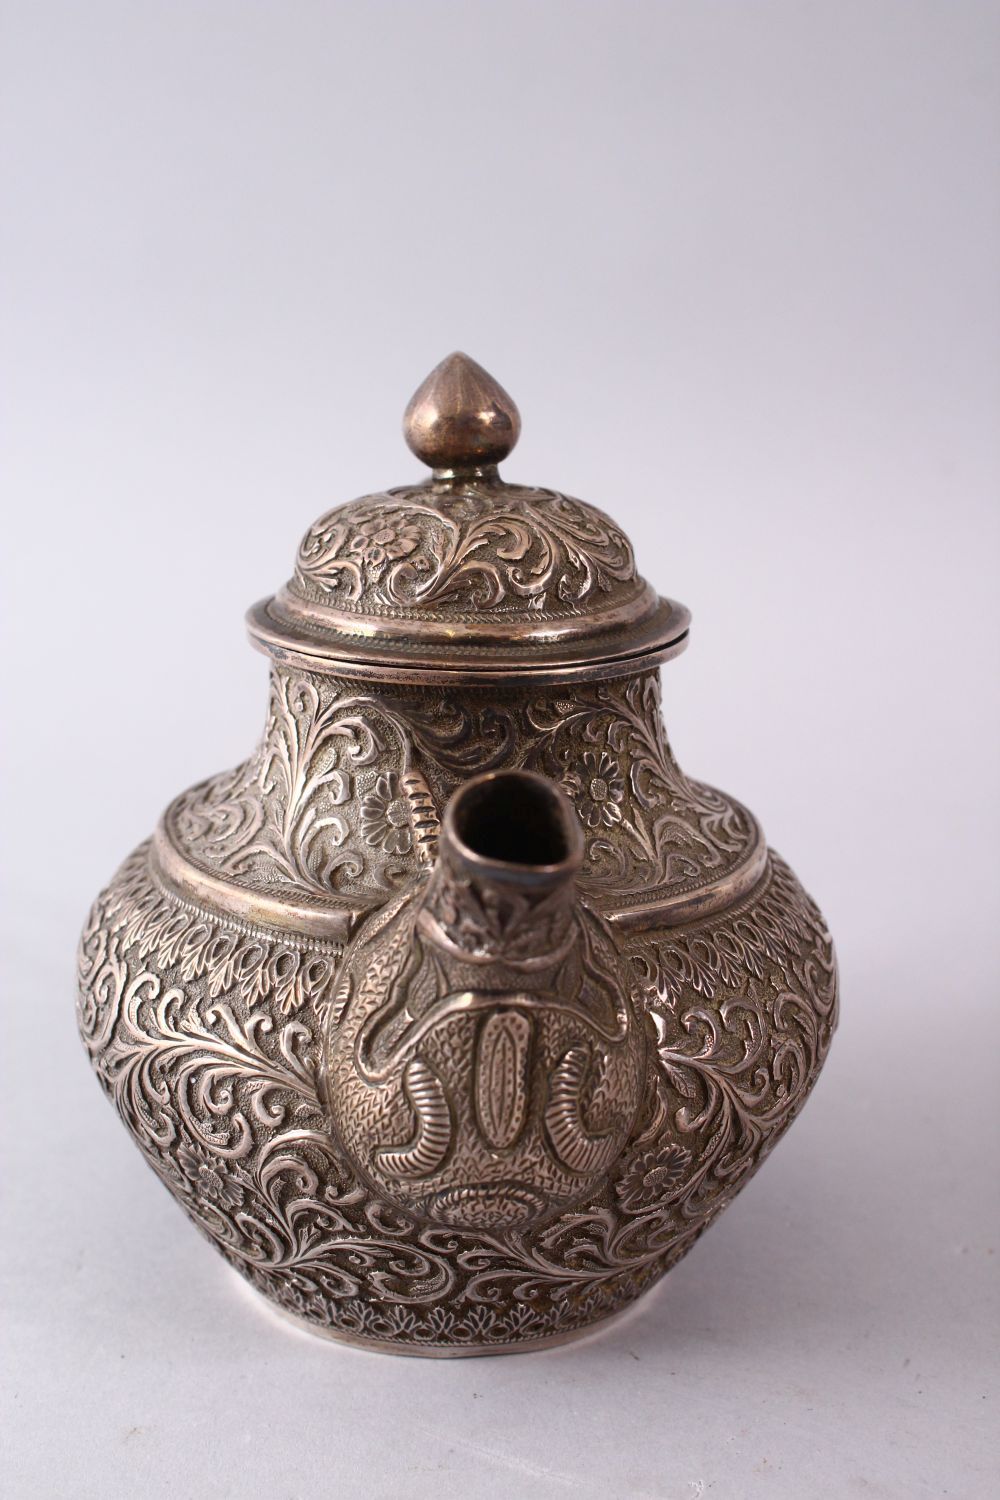 A GOOD 19TH CENTURY TURKISH SOLID SILVER TEAPOT carved with formal foliage and a dog style handle, - Image 2 of 10